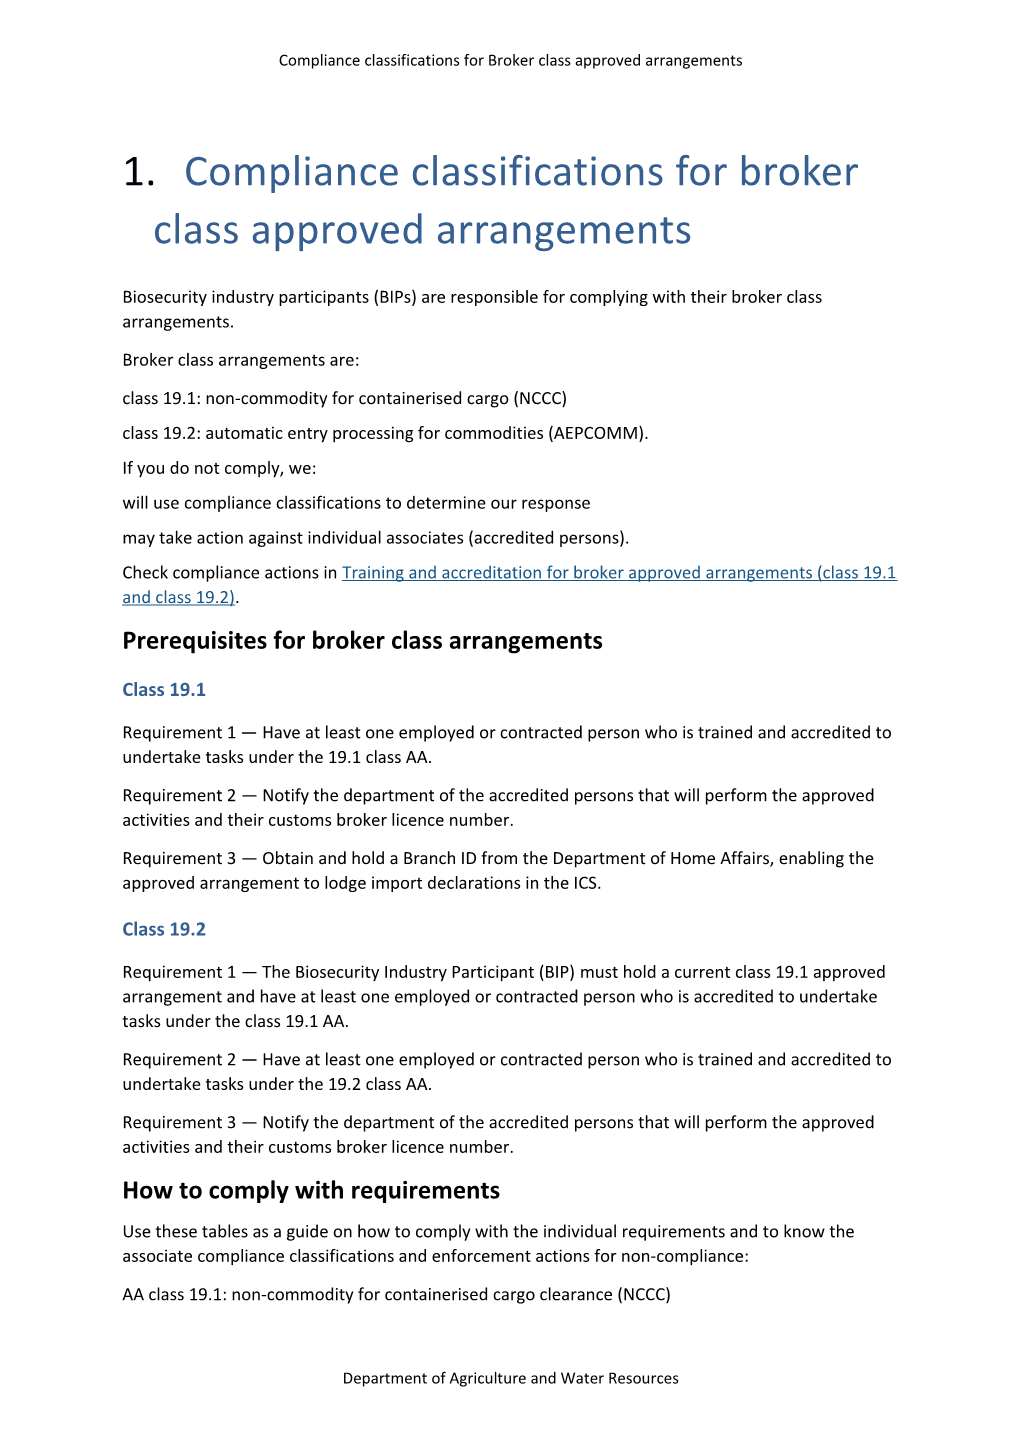 Compliance Classifications for Broker Class Approved Arrangements